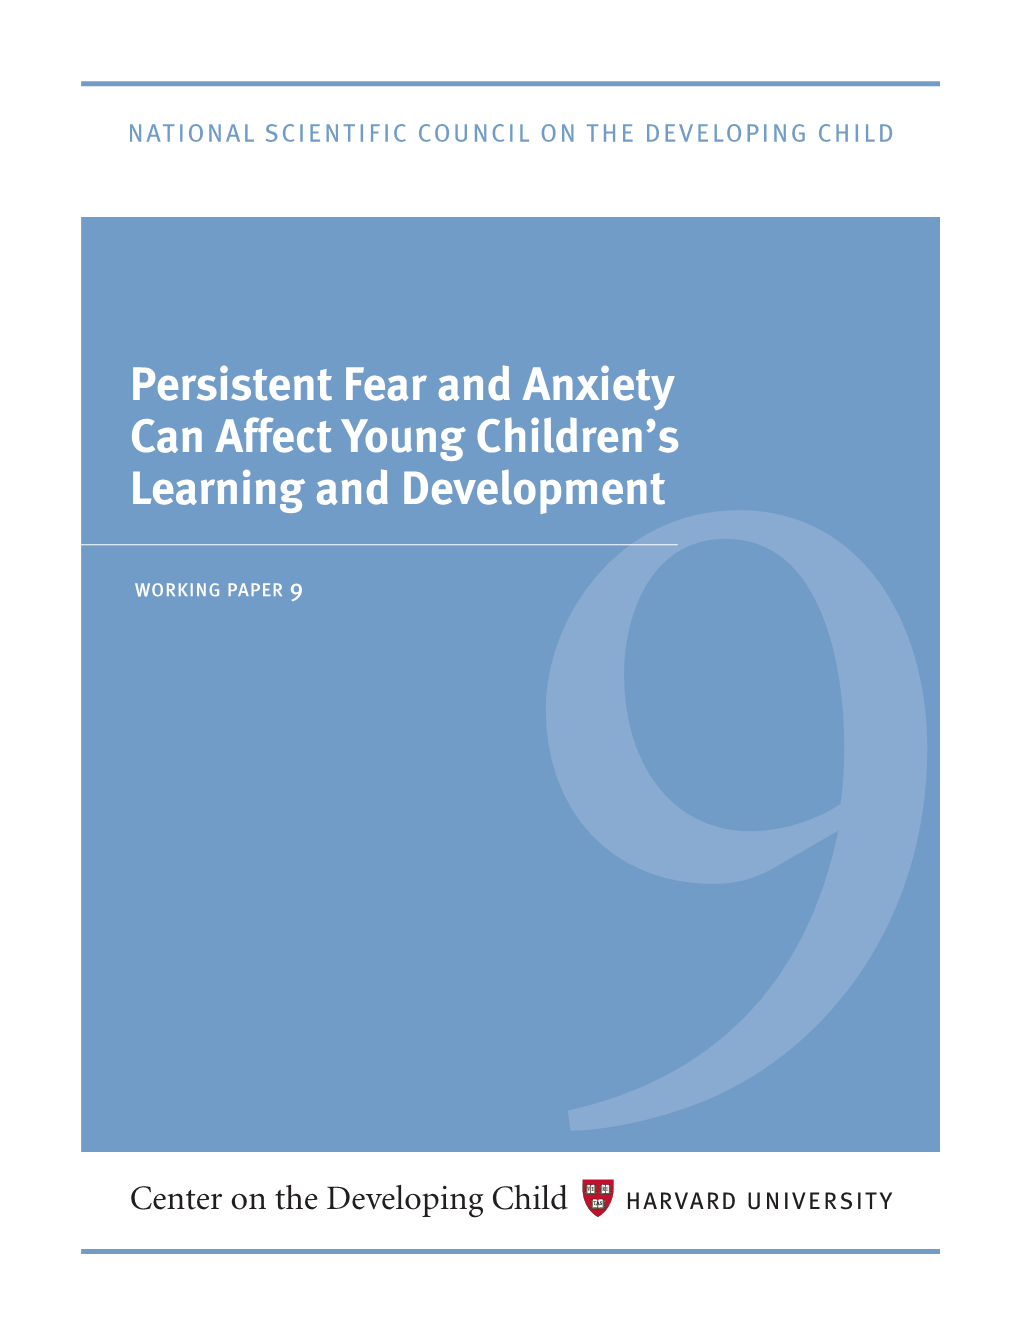 Persistent Fear and Anxiety Can Affect Young Children's Learning And